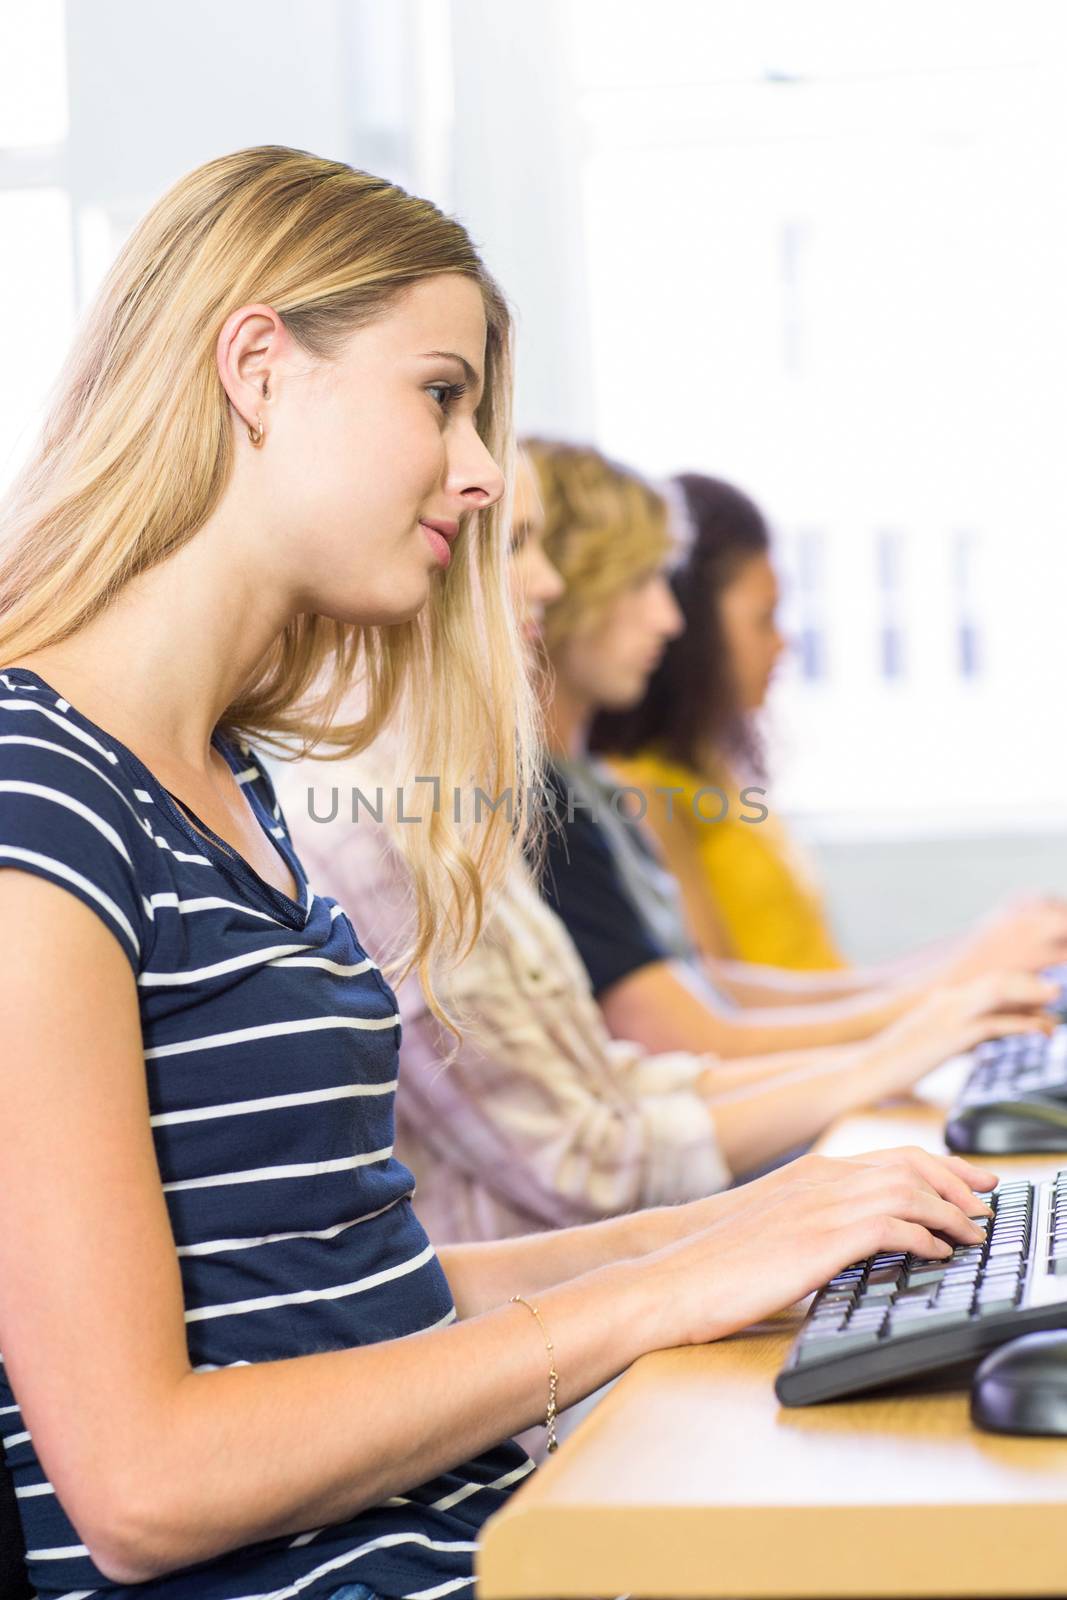 Students in row at computer class by Wavebreakmedia